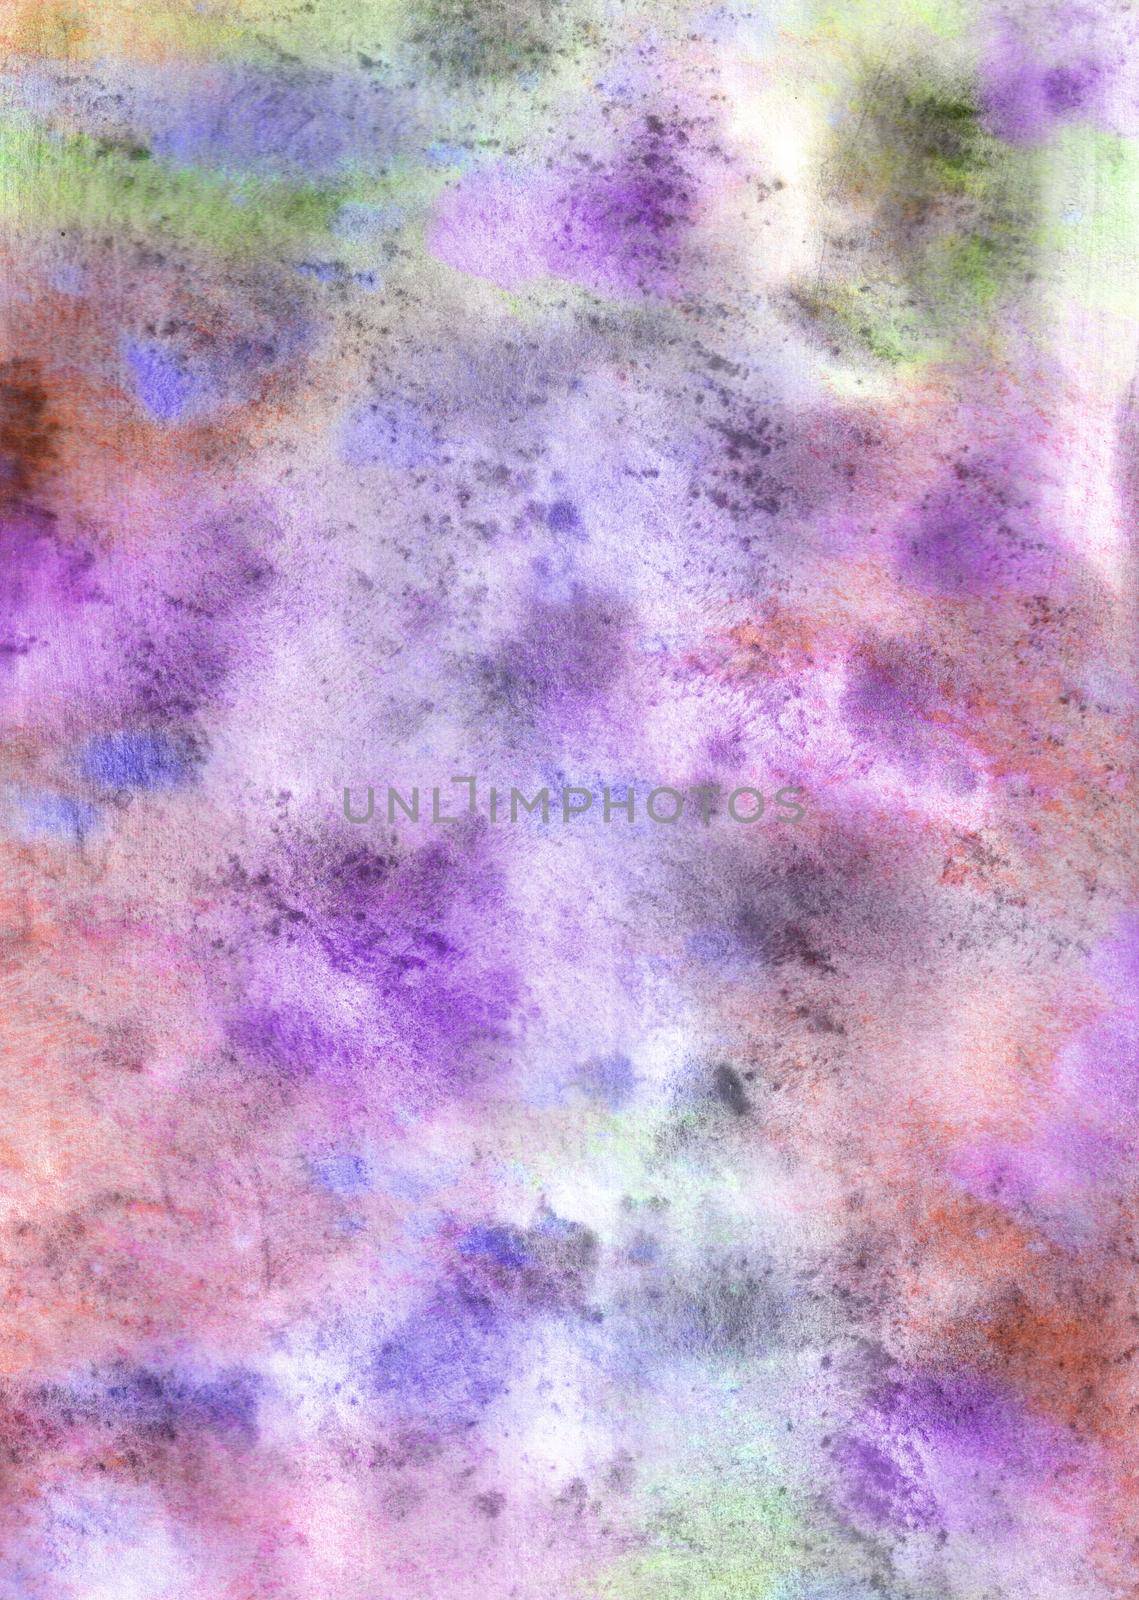 Color abstract watercolor background with texture effect and smooth transitions in different colors. illustration for posters, postcards, banners and creative design.
 by Grommik